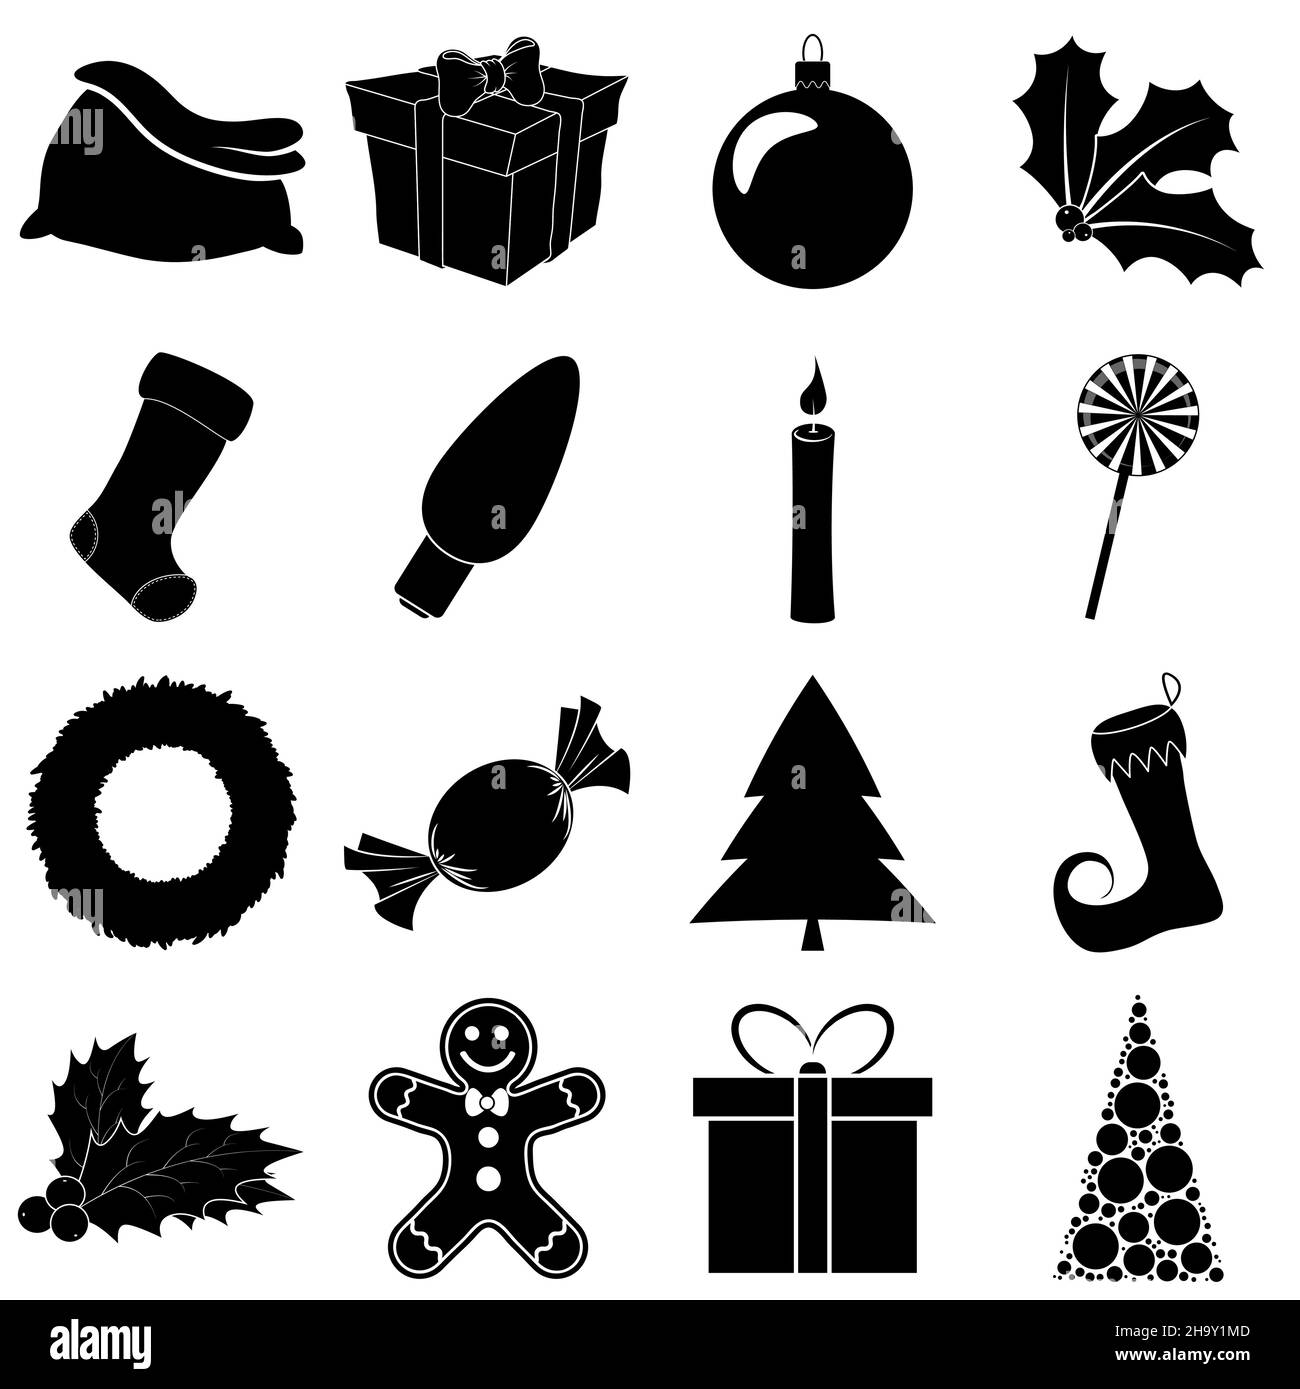 Christmas silhouette icon set. Collection of black december holiday ...